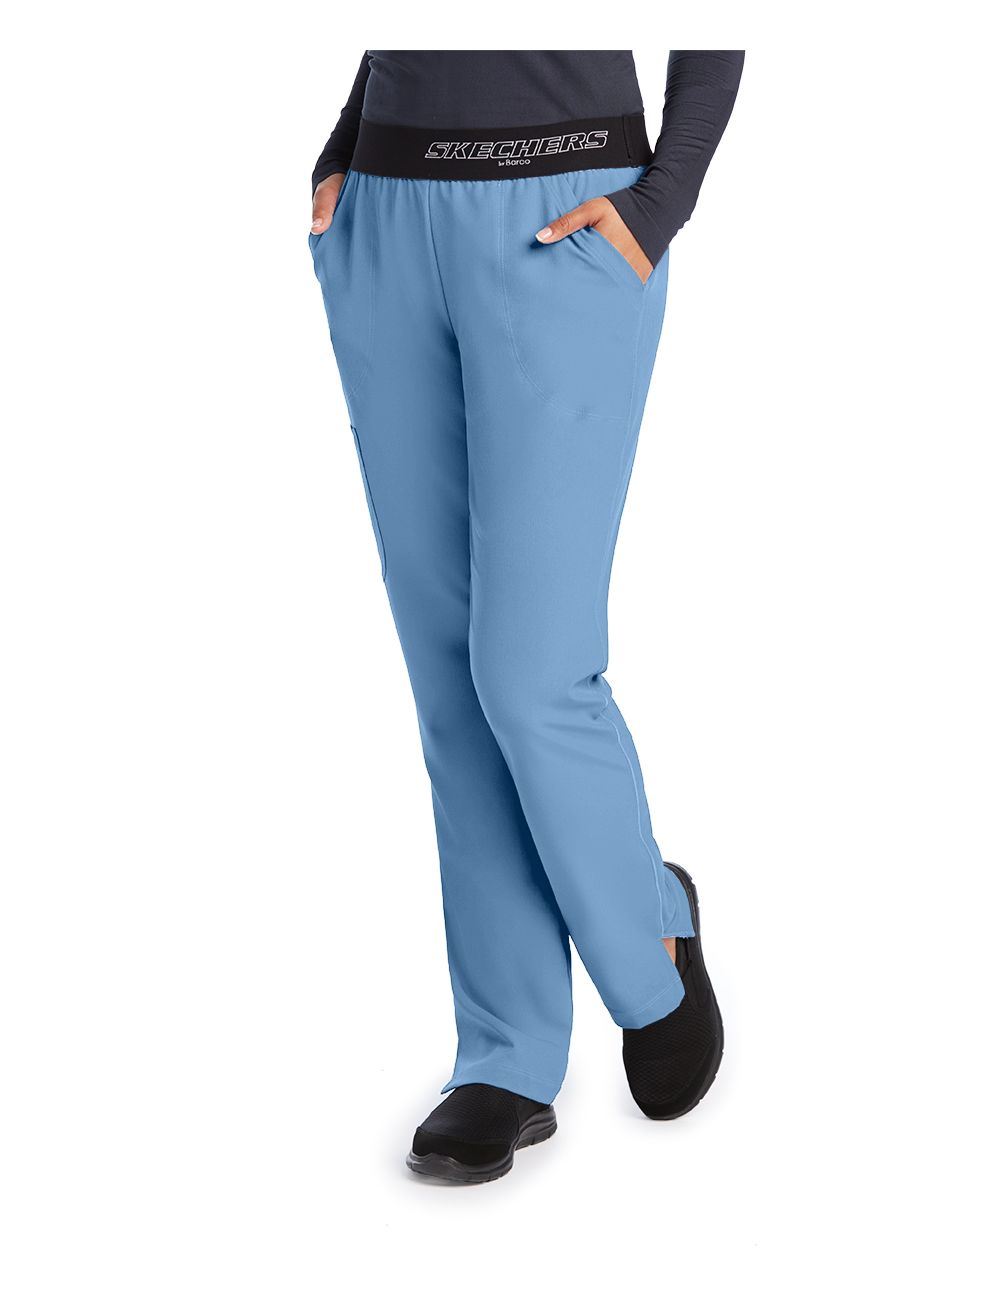 https://www.mankaia.com/32161-zoom_product/women-s-medical-trousers-skechers-collection-sk202-.jpg